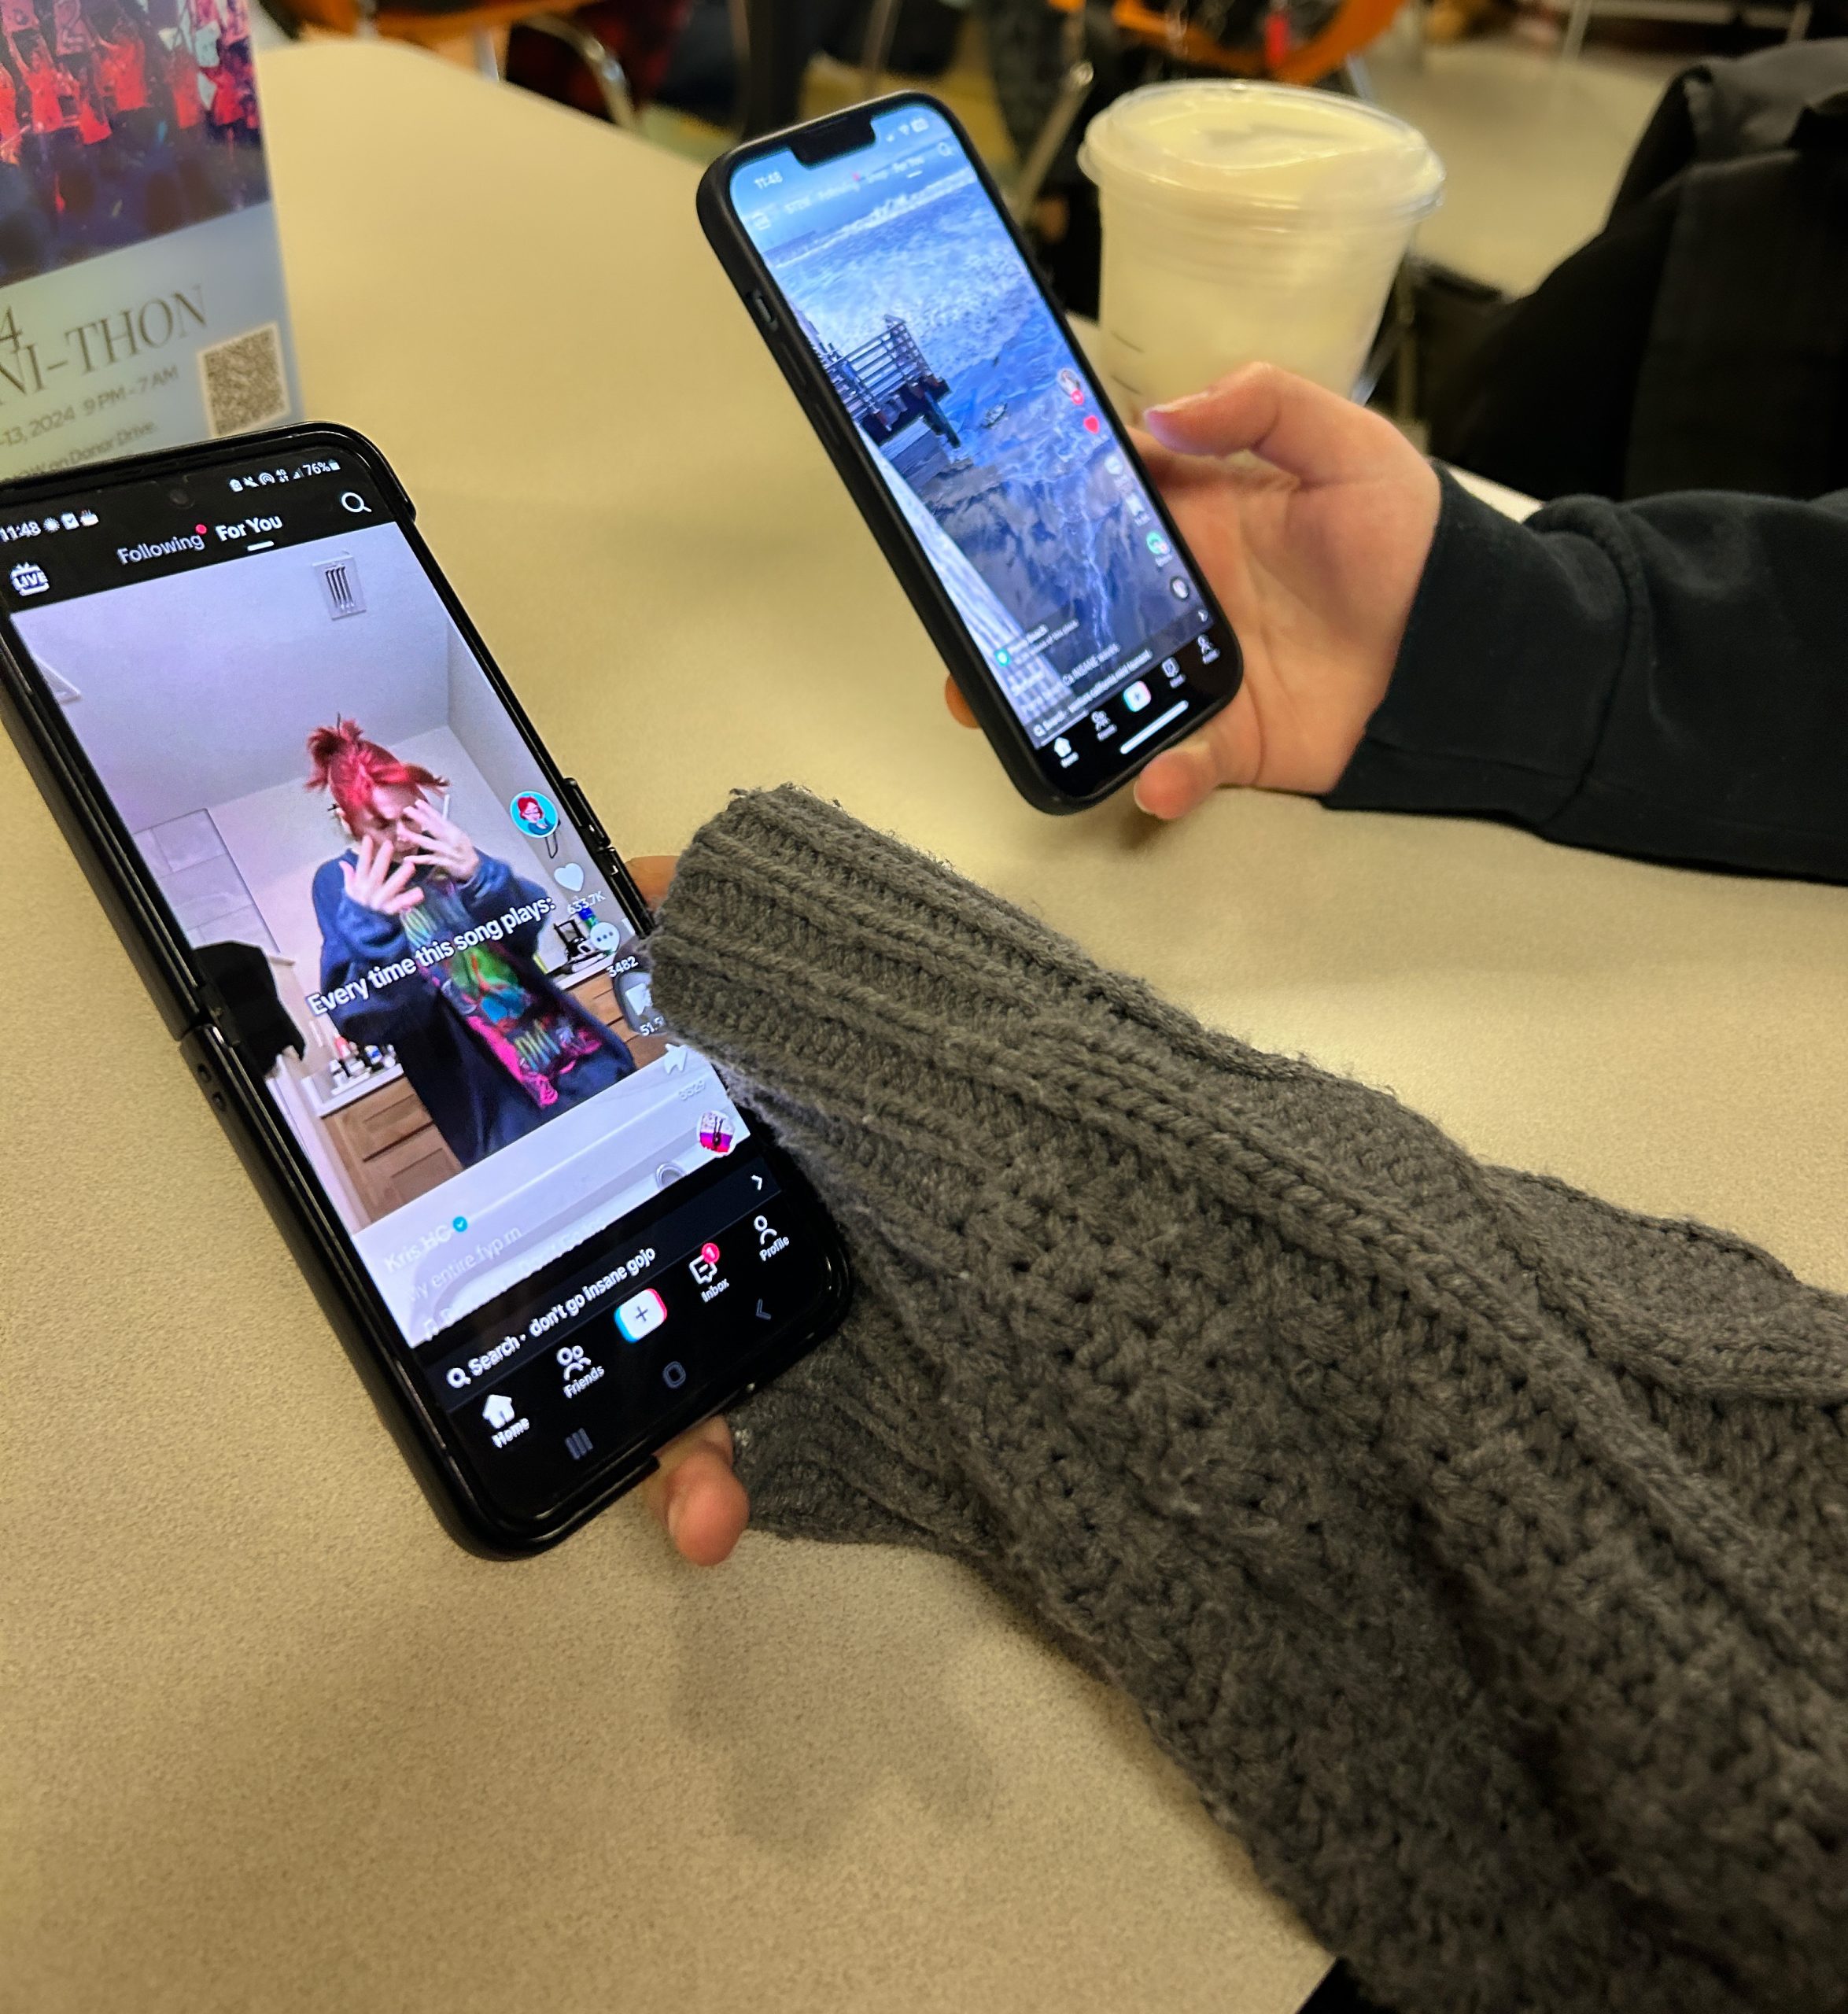 As soon as the bell rang to end lunch, students were on their phones checking TikTok.